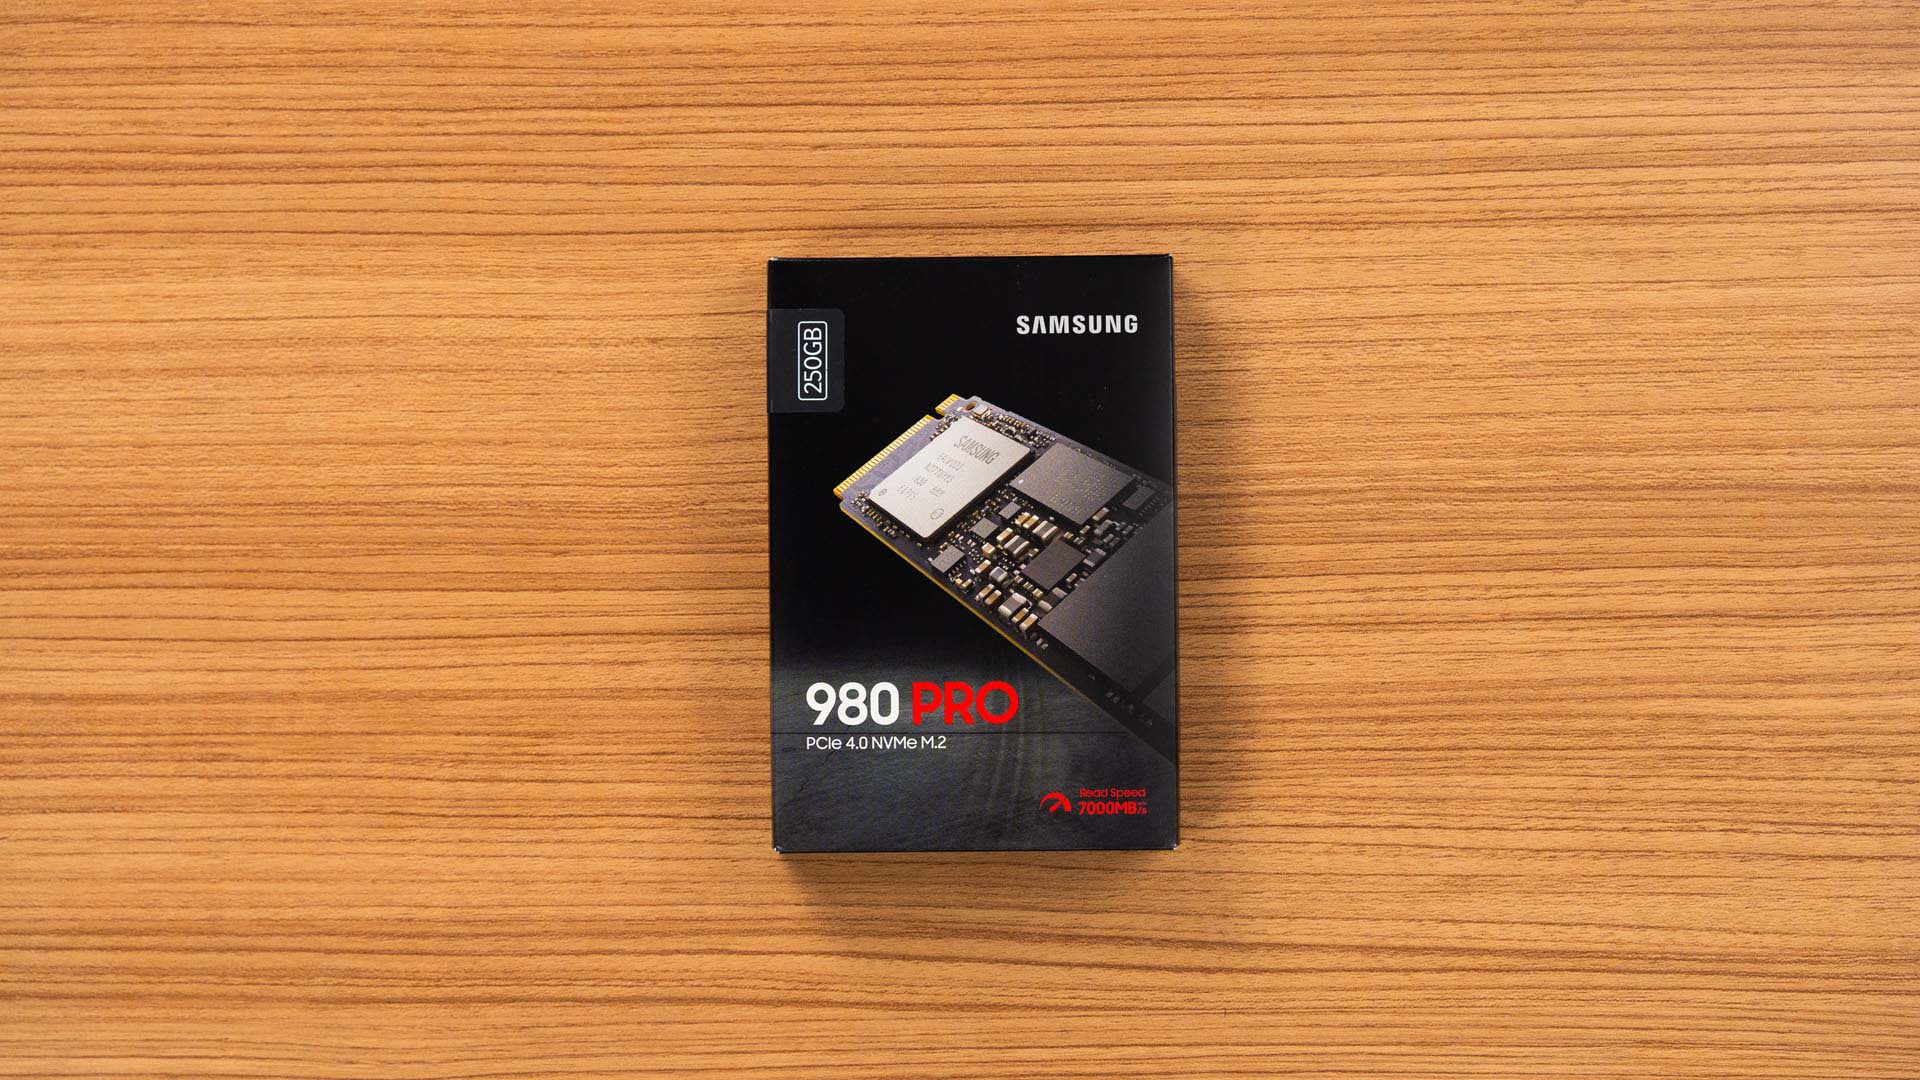 Review Samsung 980 PCIe 4.0 NVMe SSD 250GB - Great example of premium SSDs have their own market